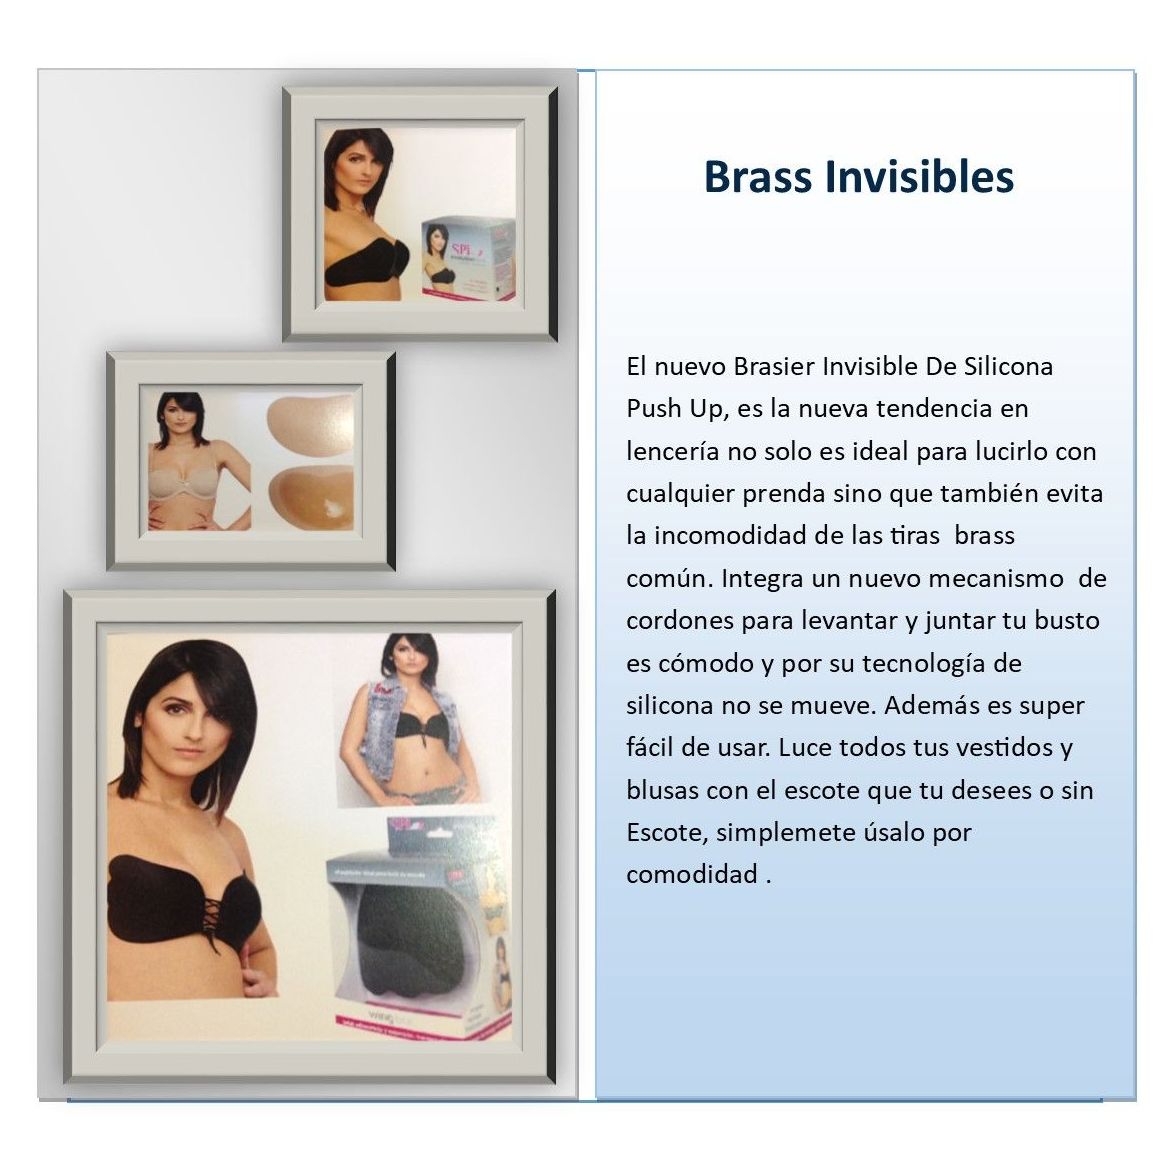 Brass Invisibles